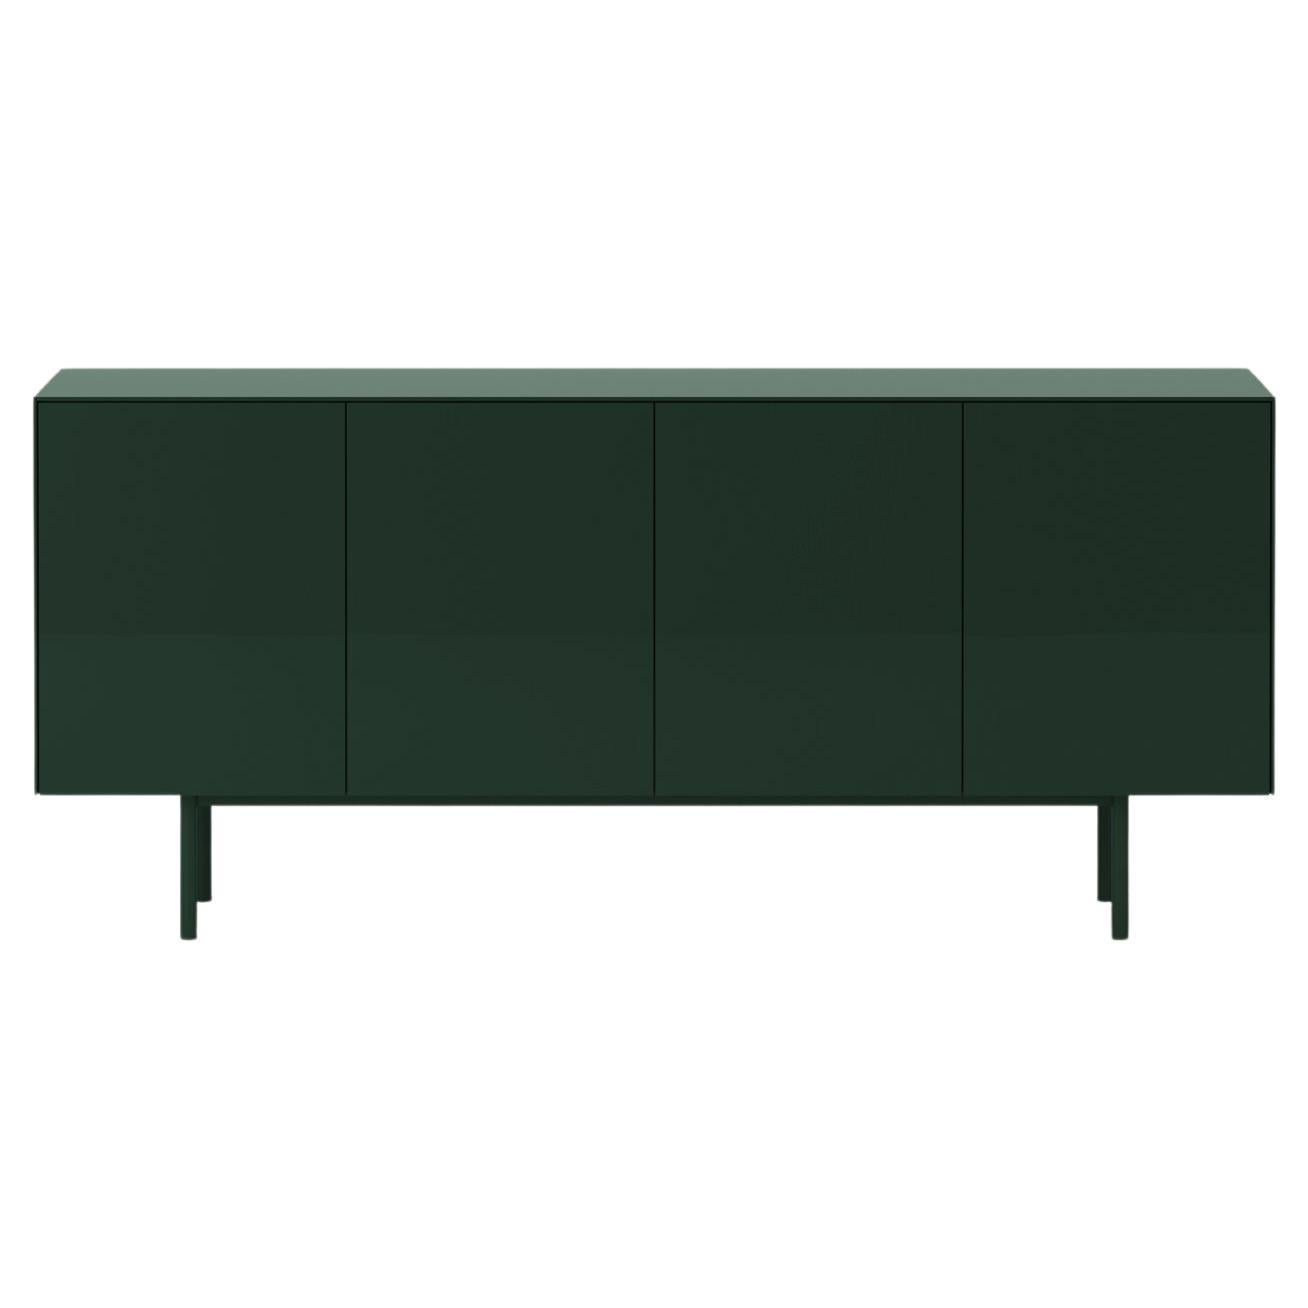 The 44 Server in hand polished green lacquer